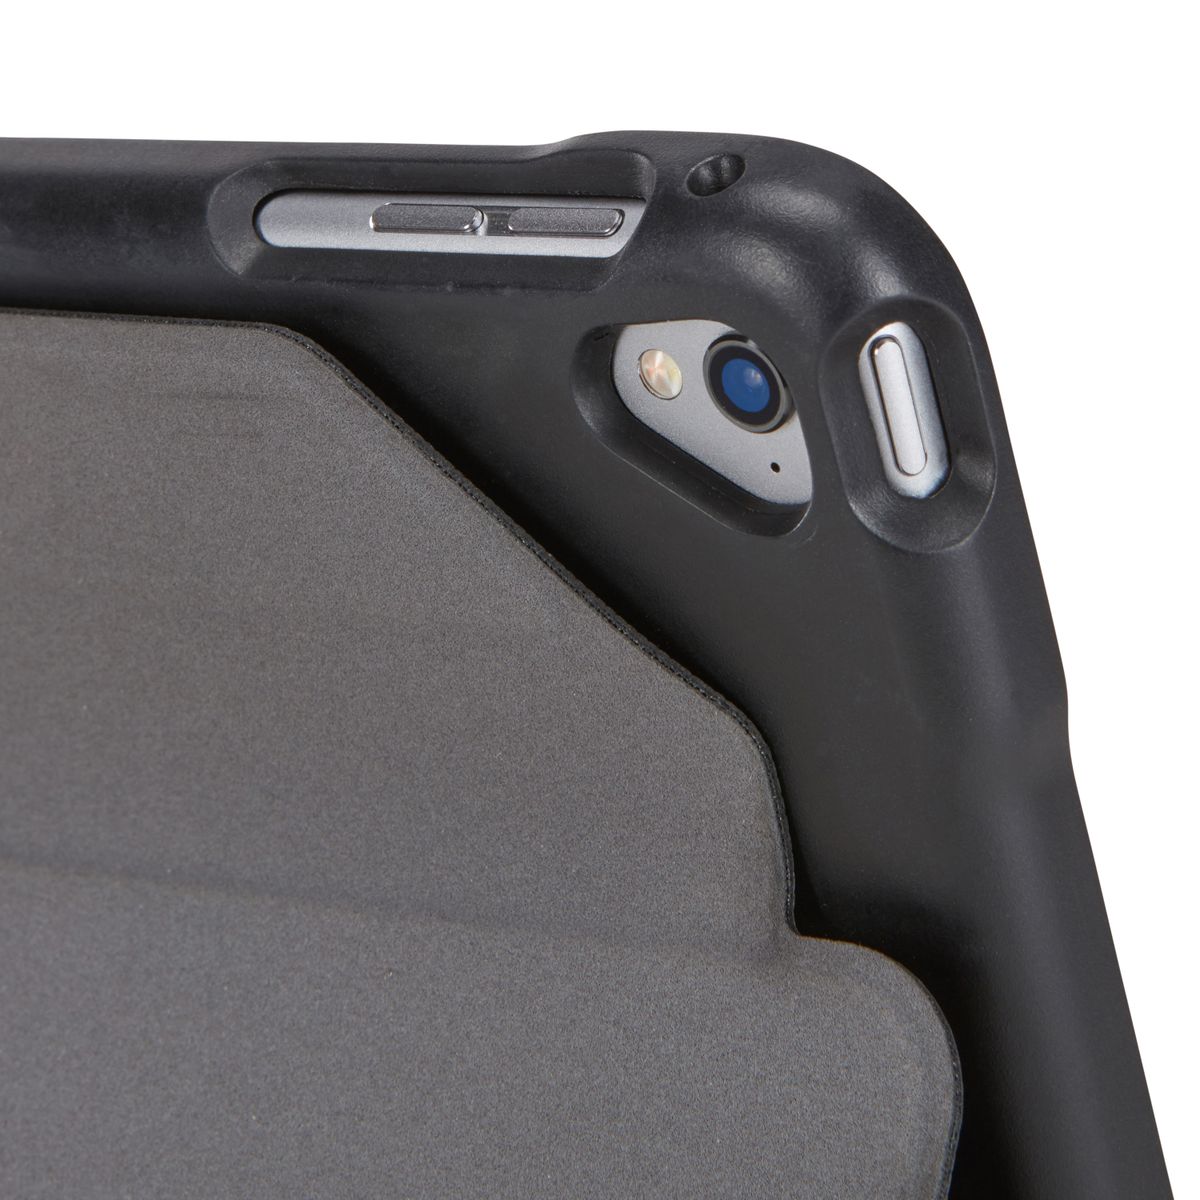 Case Logic Snapview case for 9.7" iPad